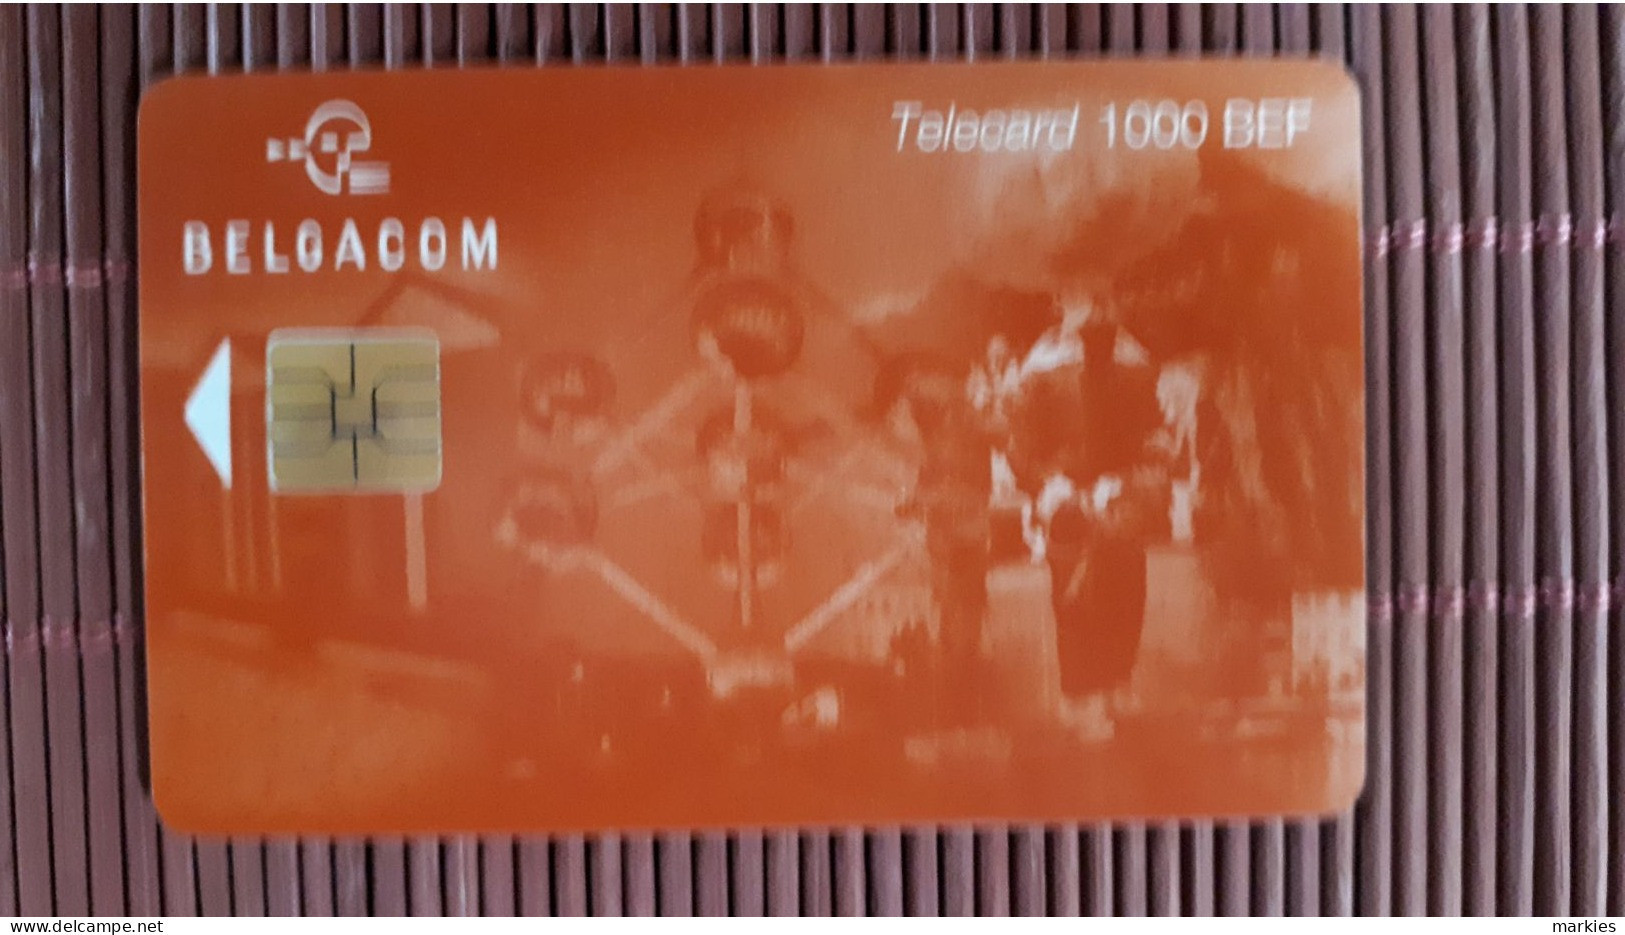 Atomium Phonecard  1000 BEF  HI 31.12..2001 Very Rare Catalogue 43,38 Euro Used Only 5000 Ex Made  Rare - Mit Chip